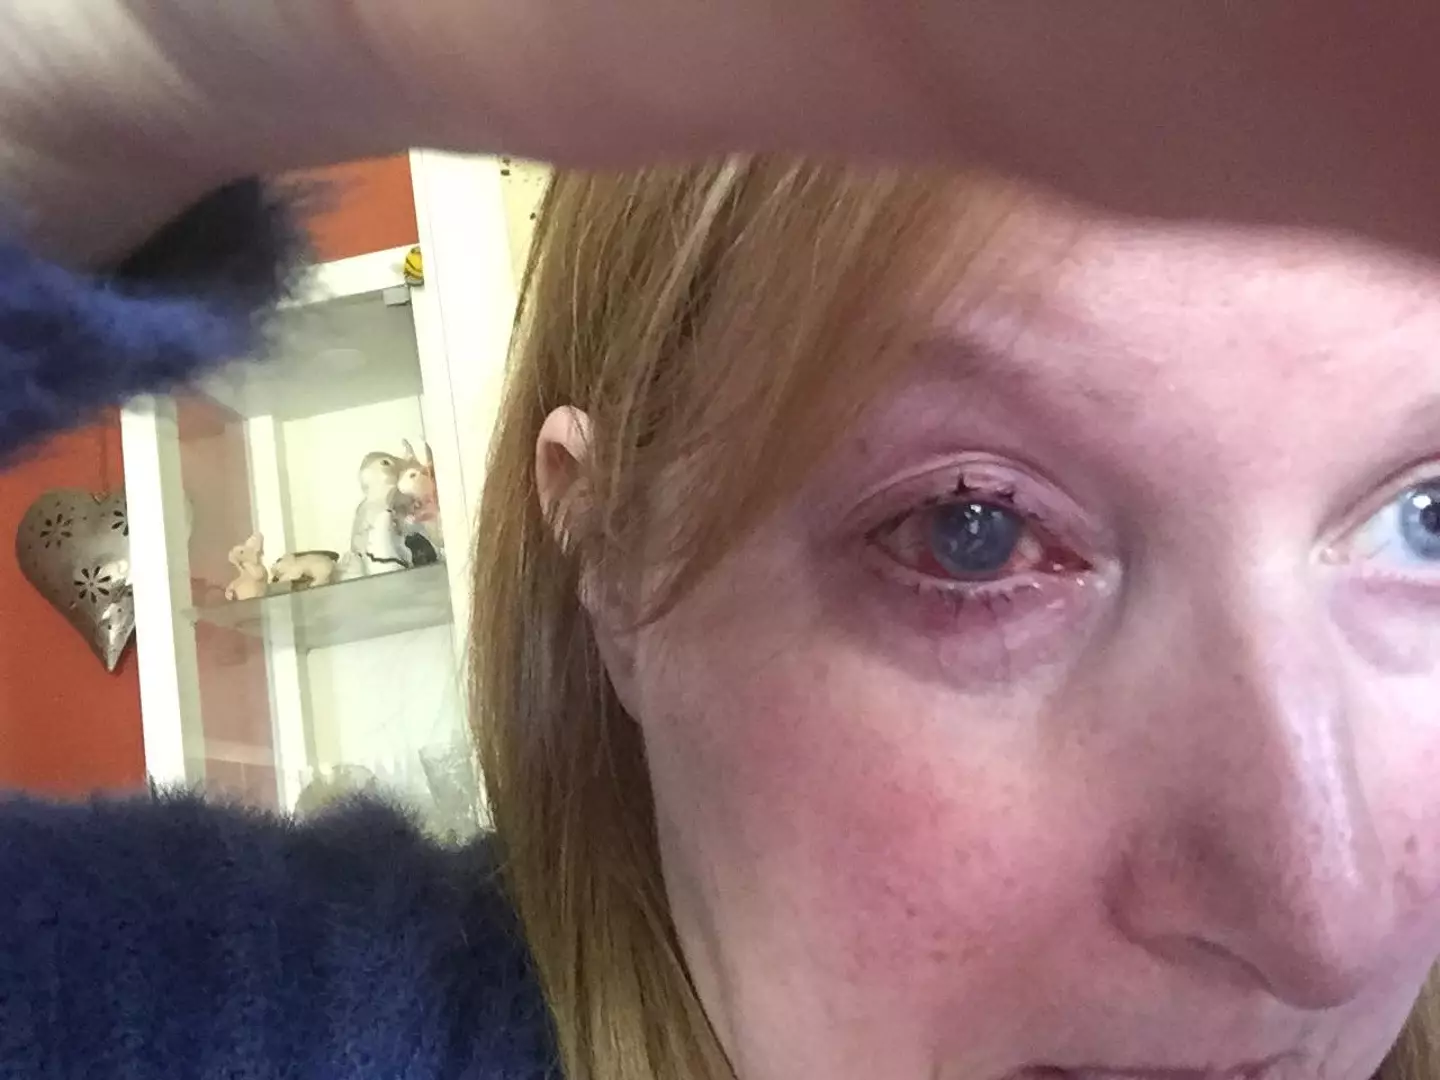 Marie Mason's eye was seriously sore, but she initially didn't know why.